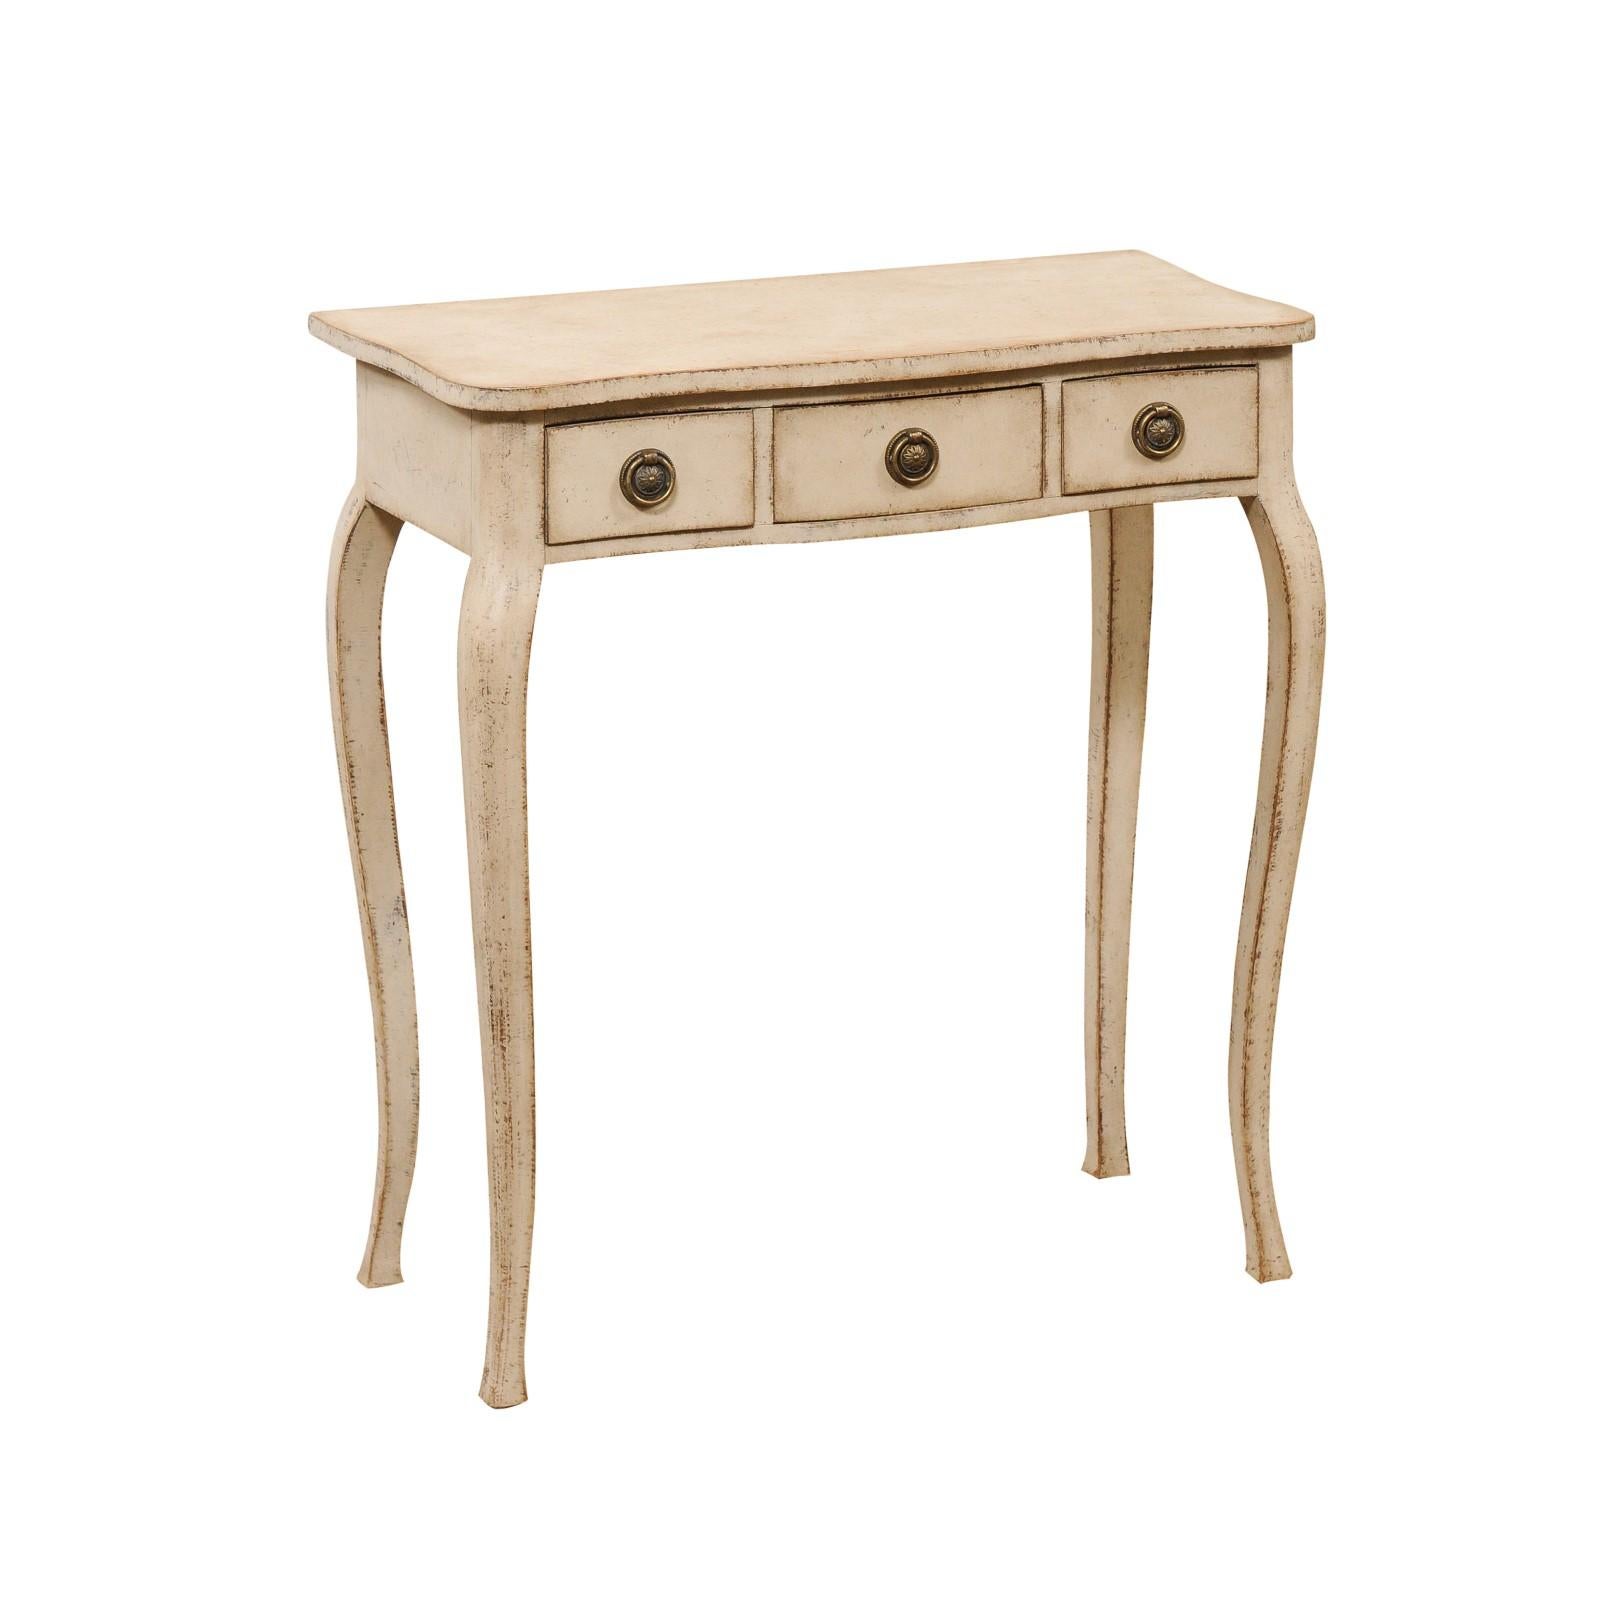 A Swedish Turn of the Century painted wood console table from the early 20th century, with serpentine front, three drawers and cabriole legs. Created in Sweden at the Turn of the Century which saw the transition between the 19th to the 20th, this